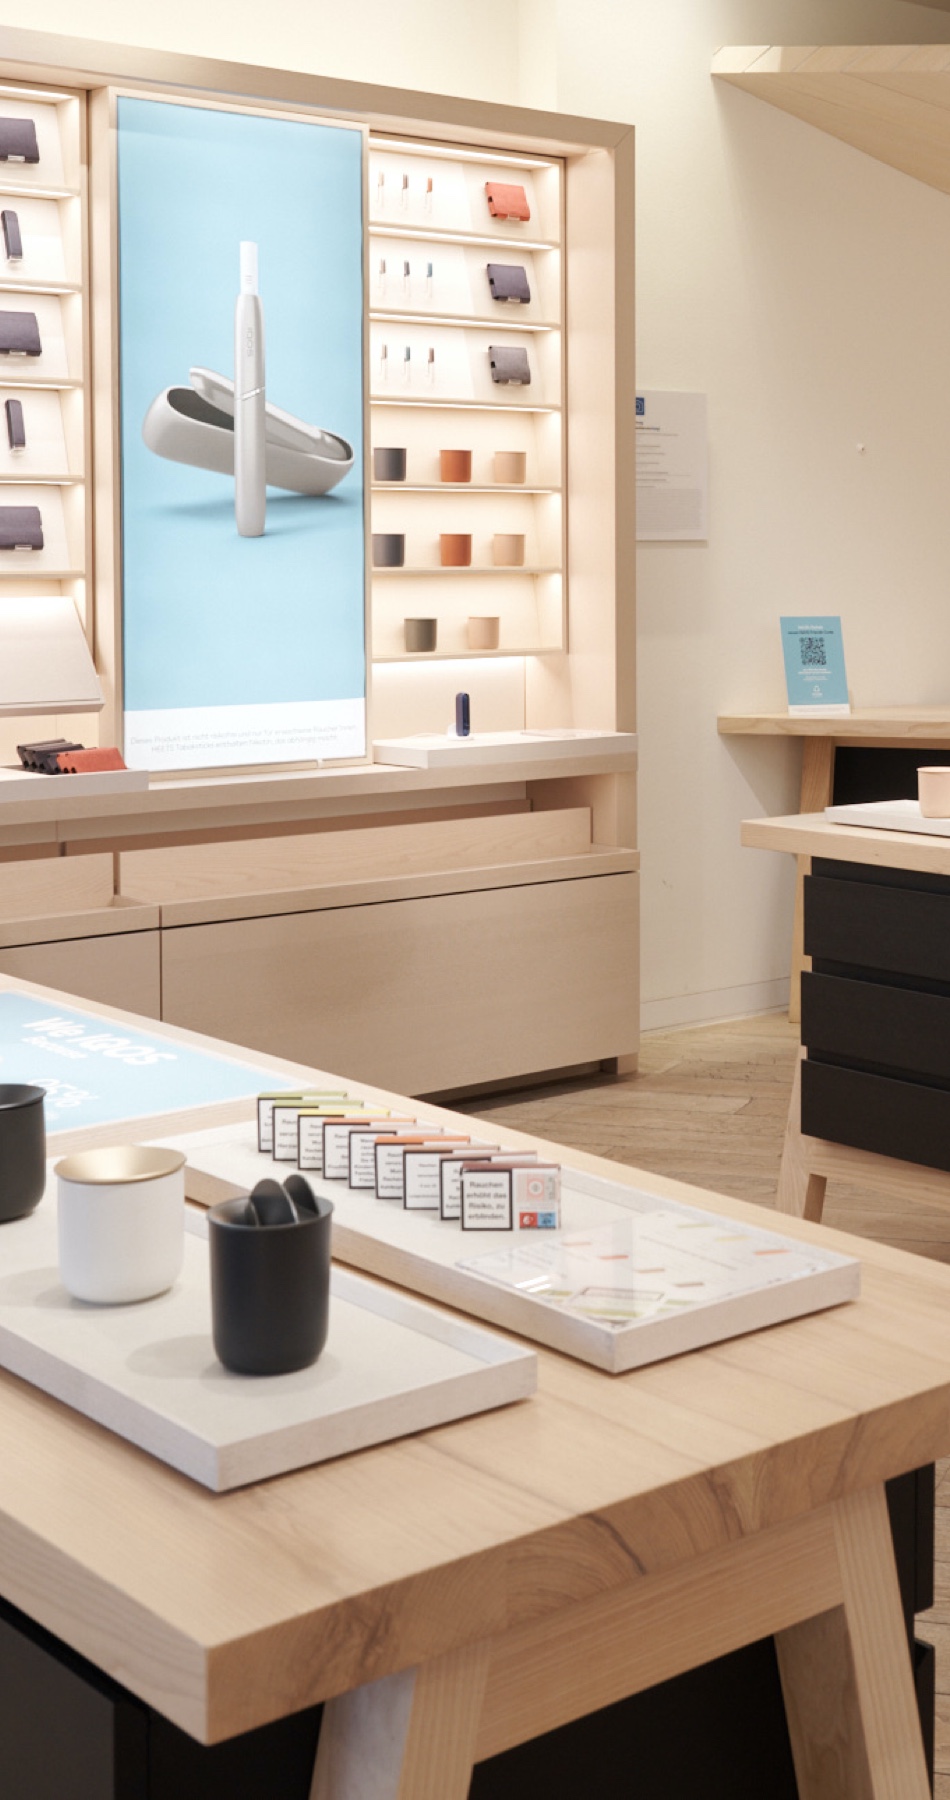 IQOS Store Interior with IQOS Trays visible